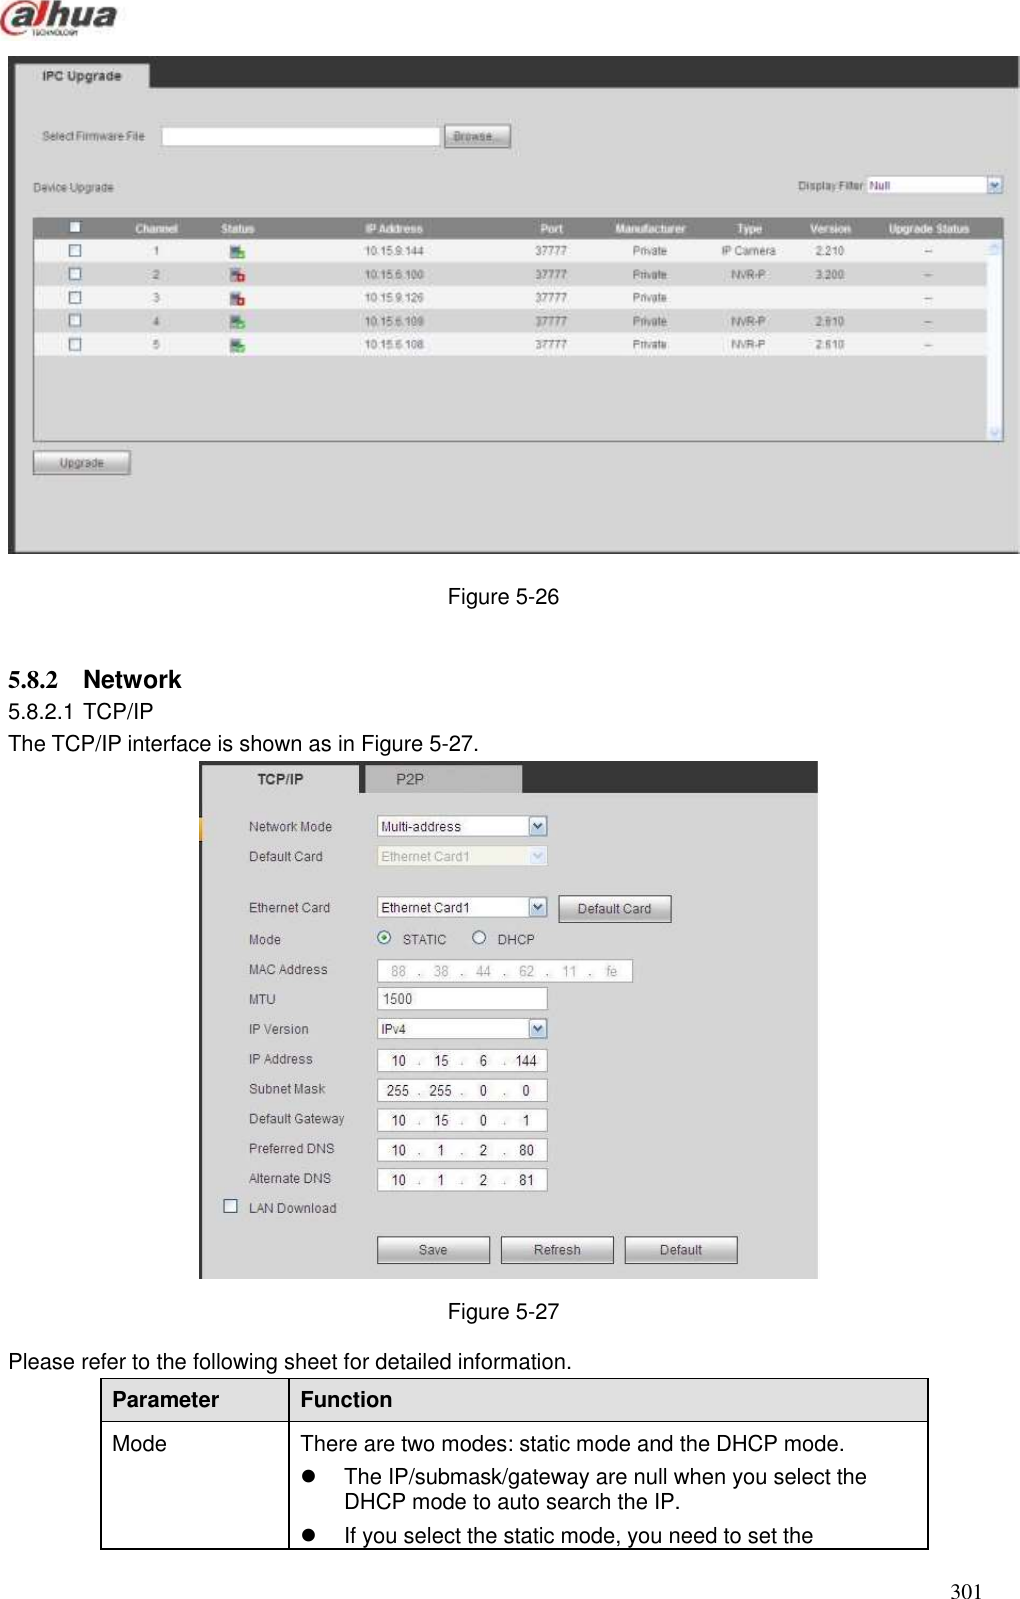  301   Figure 5-26  5.8.2  Network   5.8.2.1 TCP/IP The TCP/IP interface is shown as in Figure 5-27.  Figure 5-27 Please refer to the following sheet for detailed information.   Parameter   Function   Mode There are two modes: static mode and the DHCP mode.     The IP/submask/gateway are null when you select the DHCP mode to auto search the IP.     If you select the static mode, you need to set the 